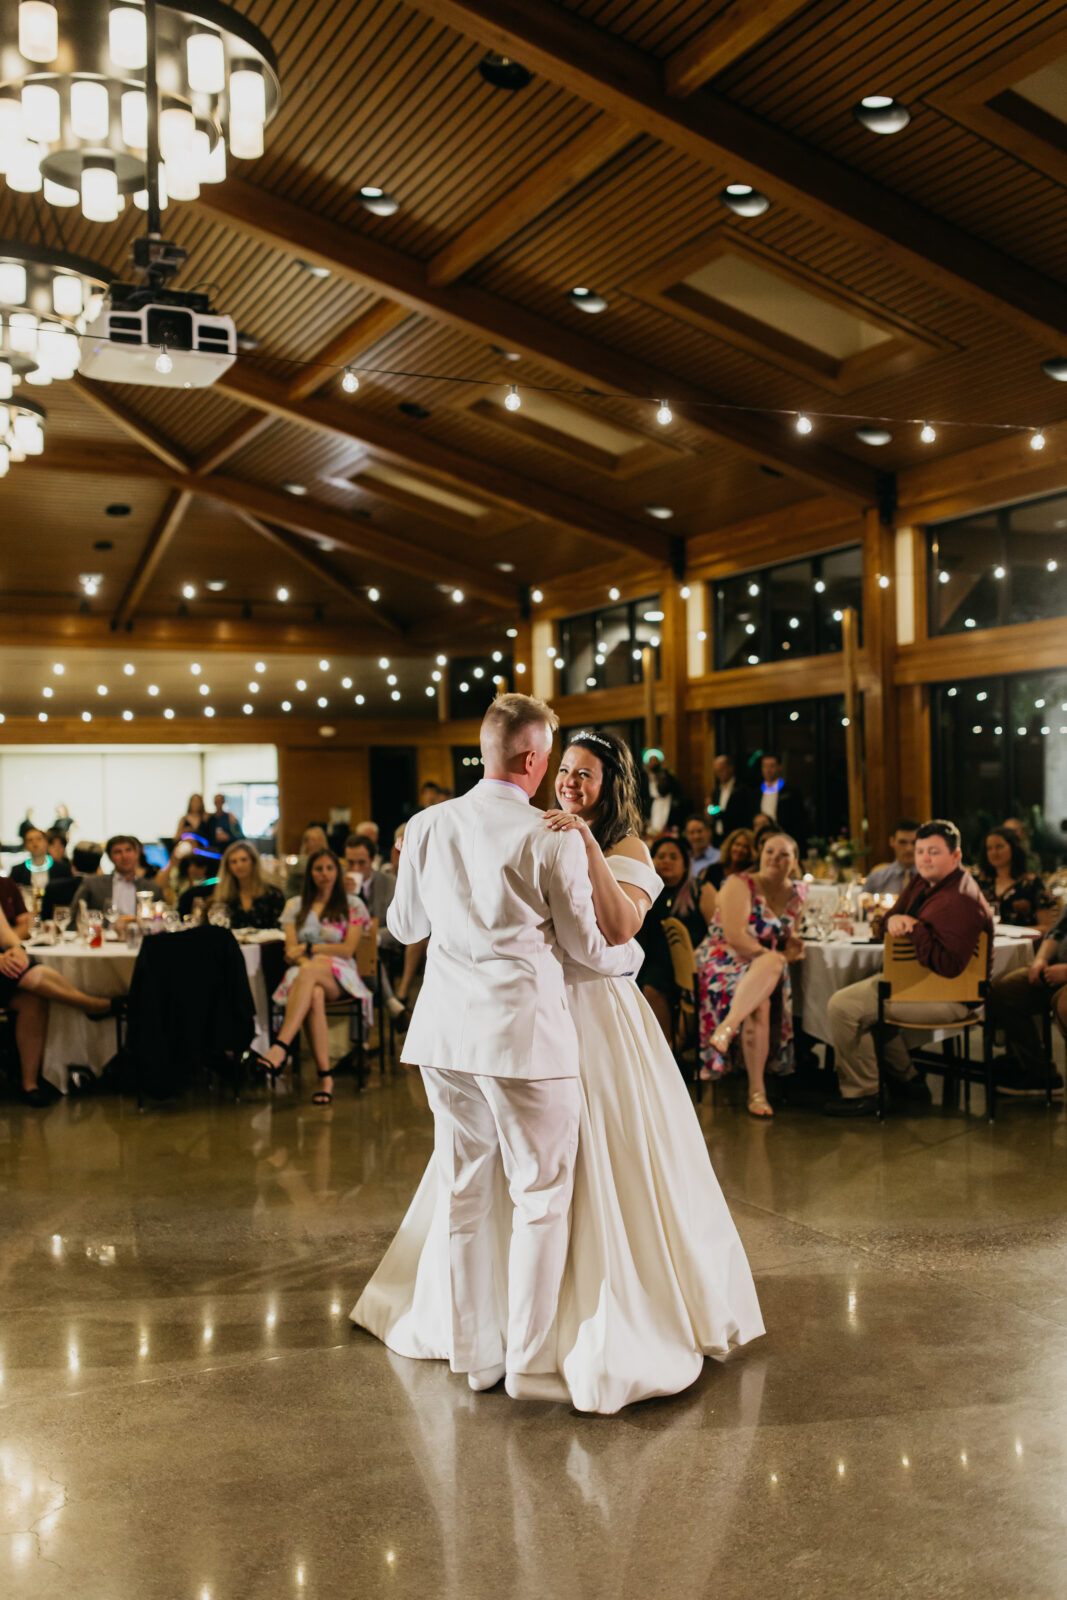 A photo of the bride and groom during their first dance as a wedding couple